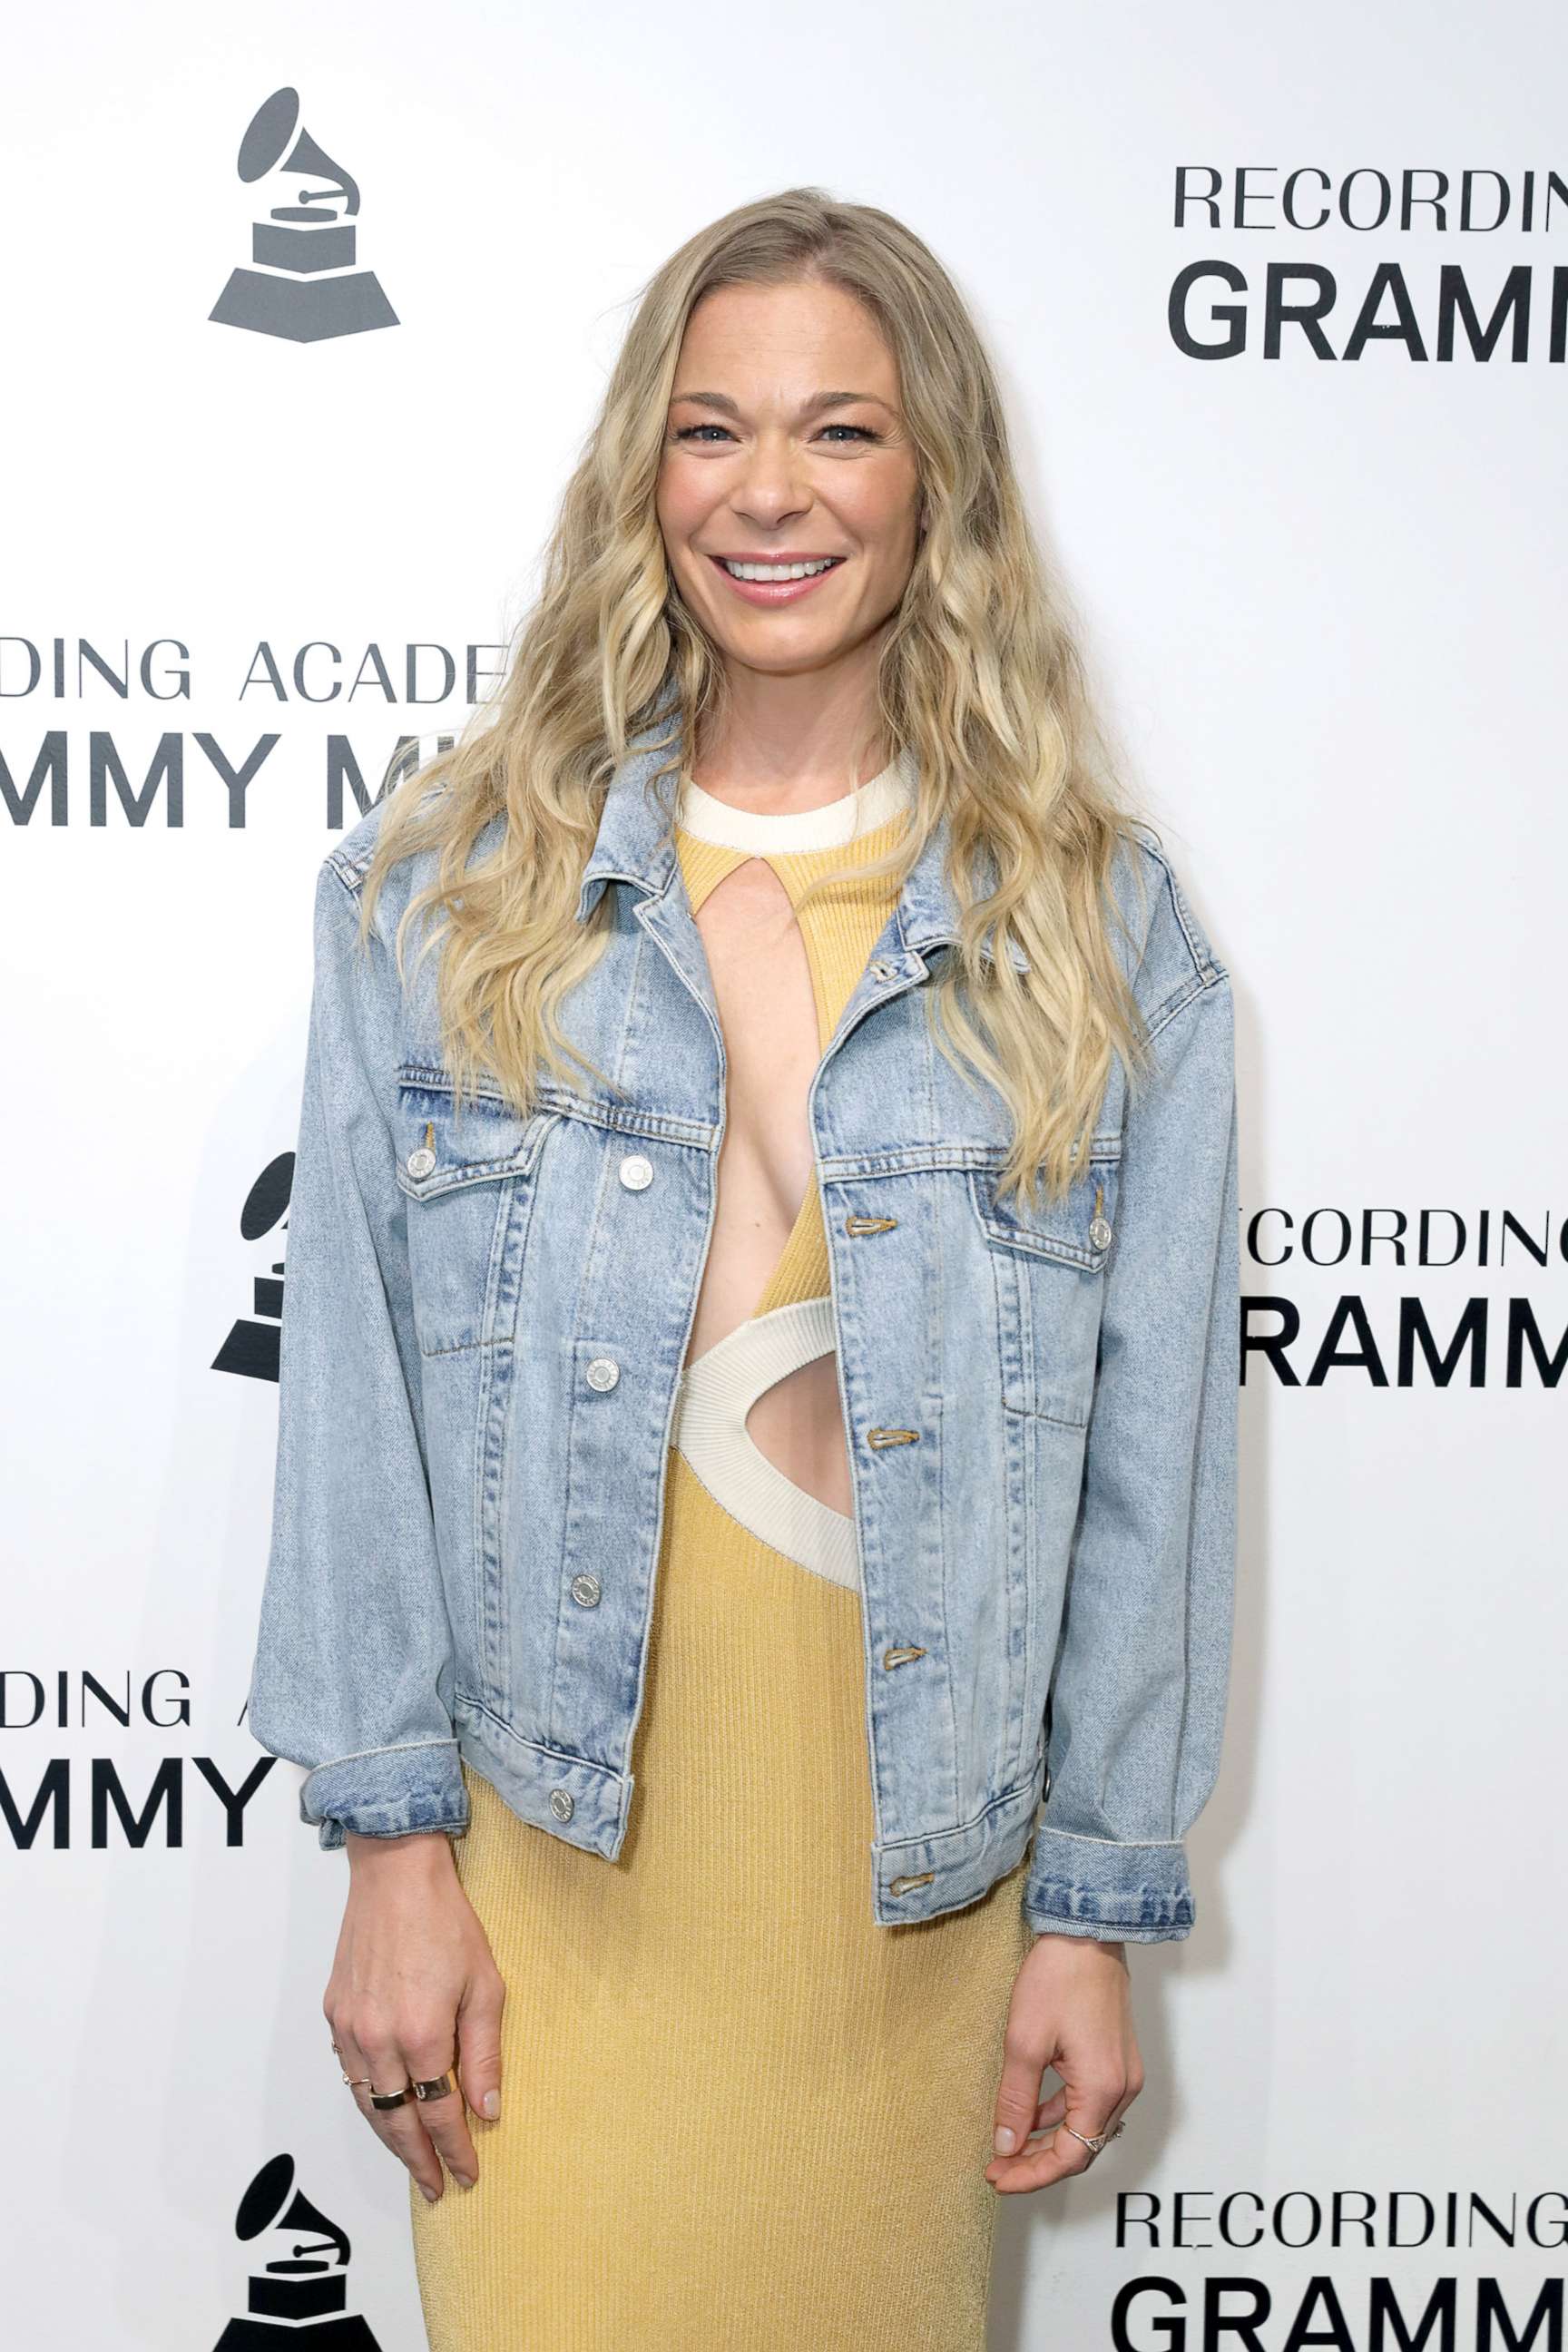 PHOTO: FILE - LeAnn Rimes attends An Evening With LeAnn Rimes at The GRAMMY Museum on May 31, 2022 in Los Angeles.